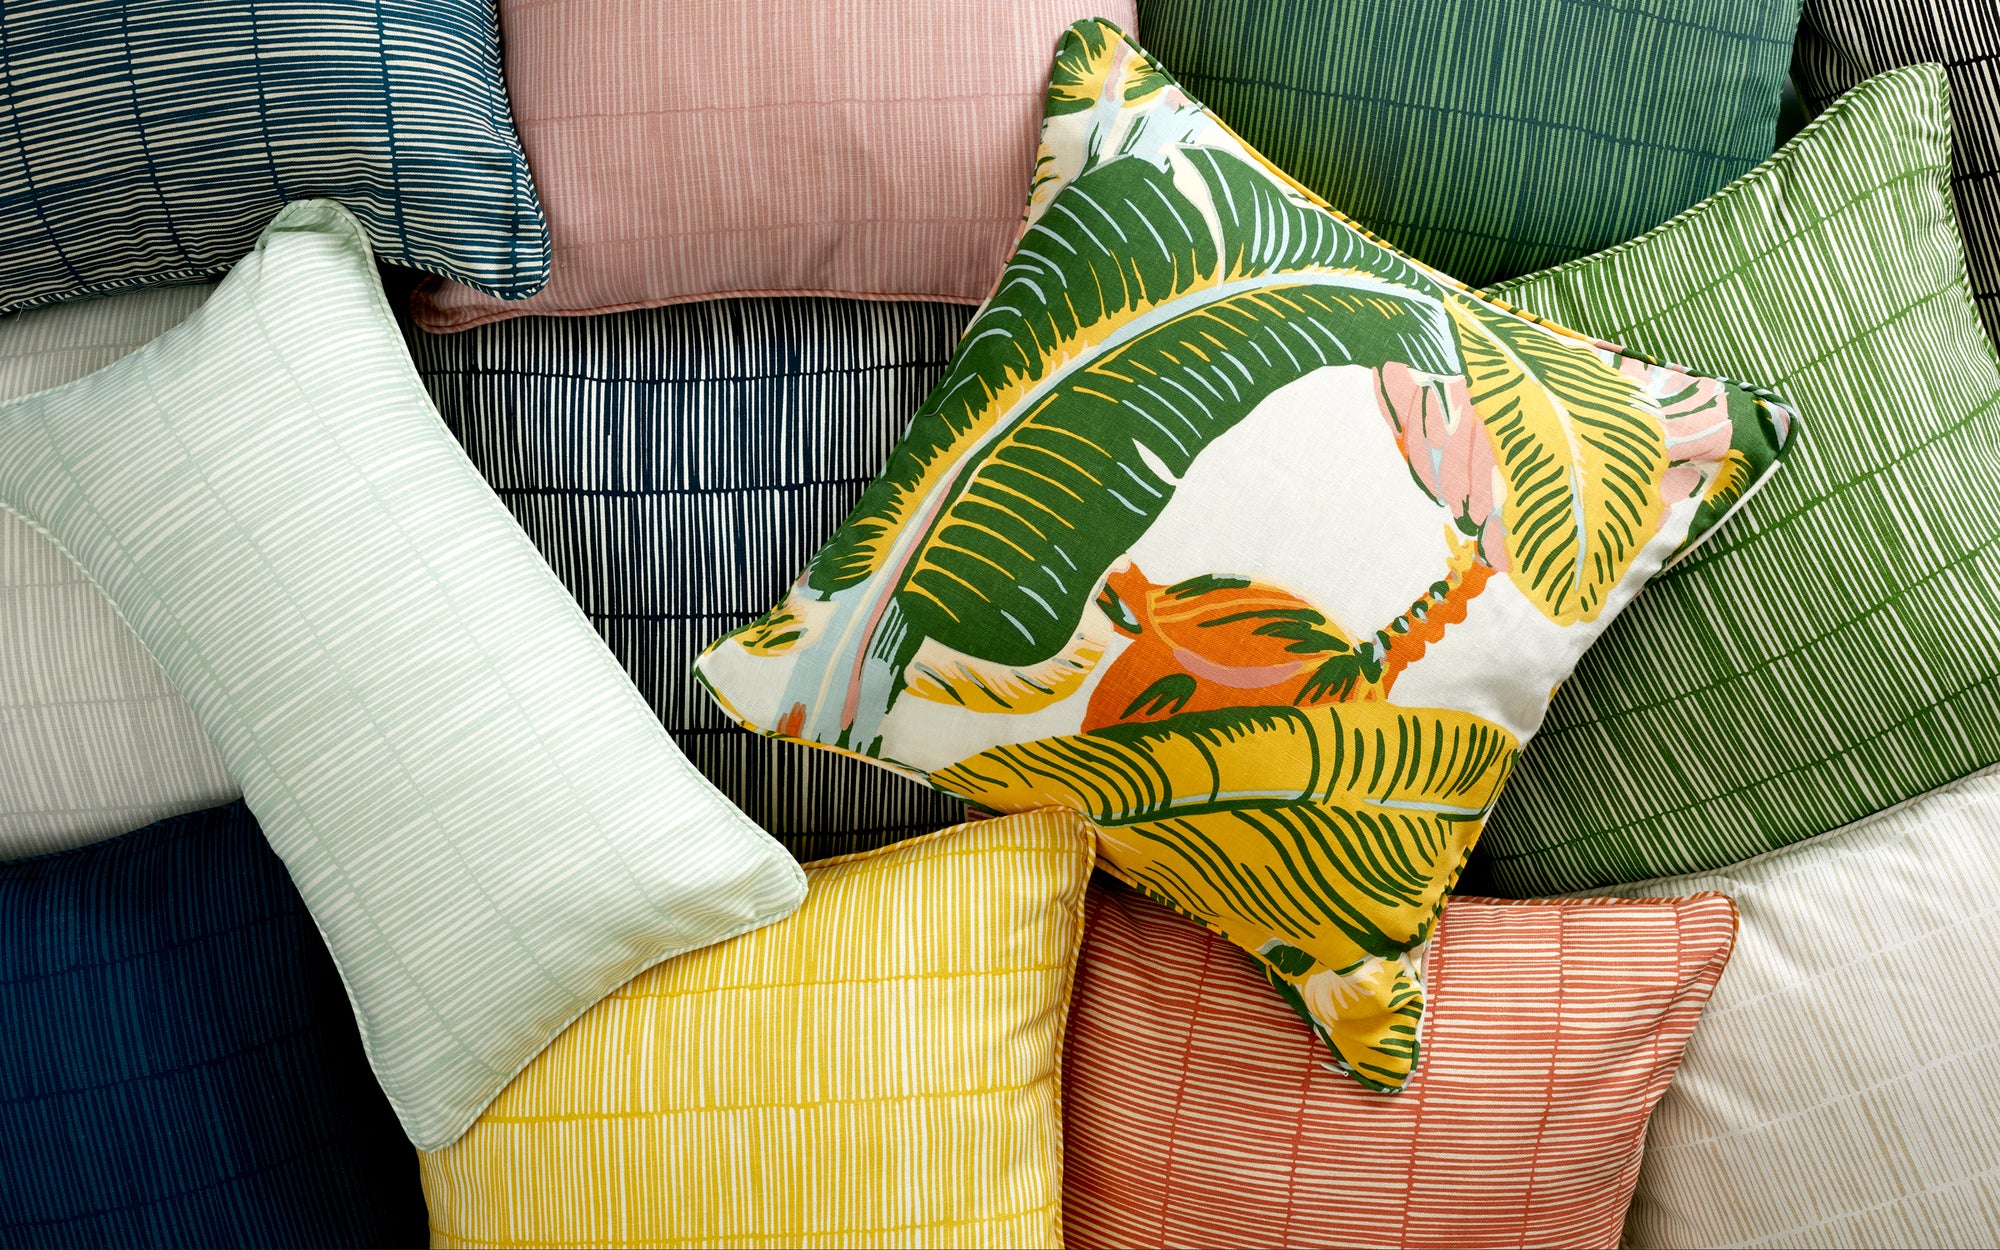 All Hand-Printed Pillows